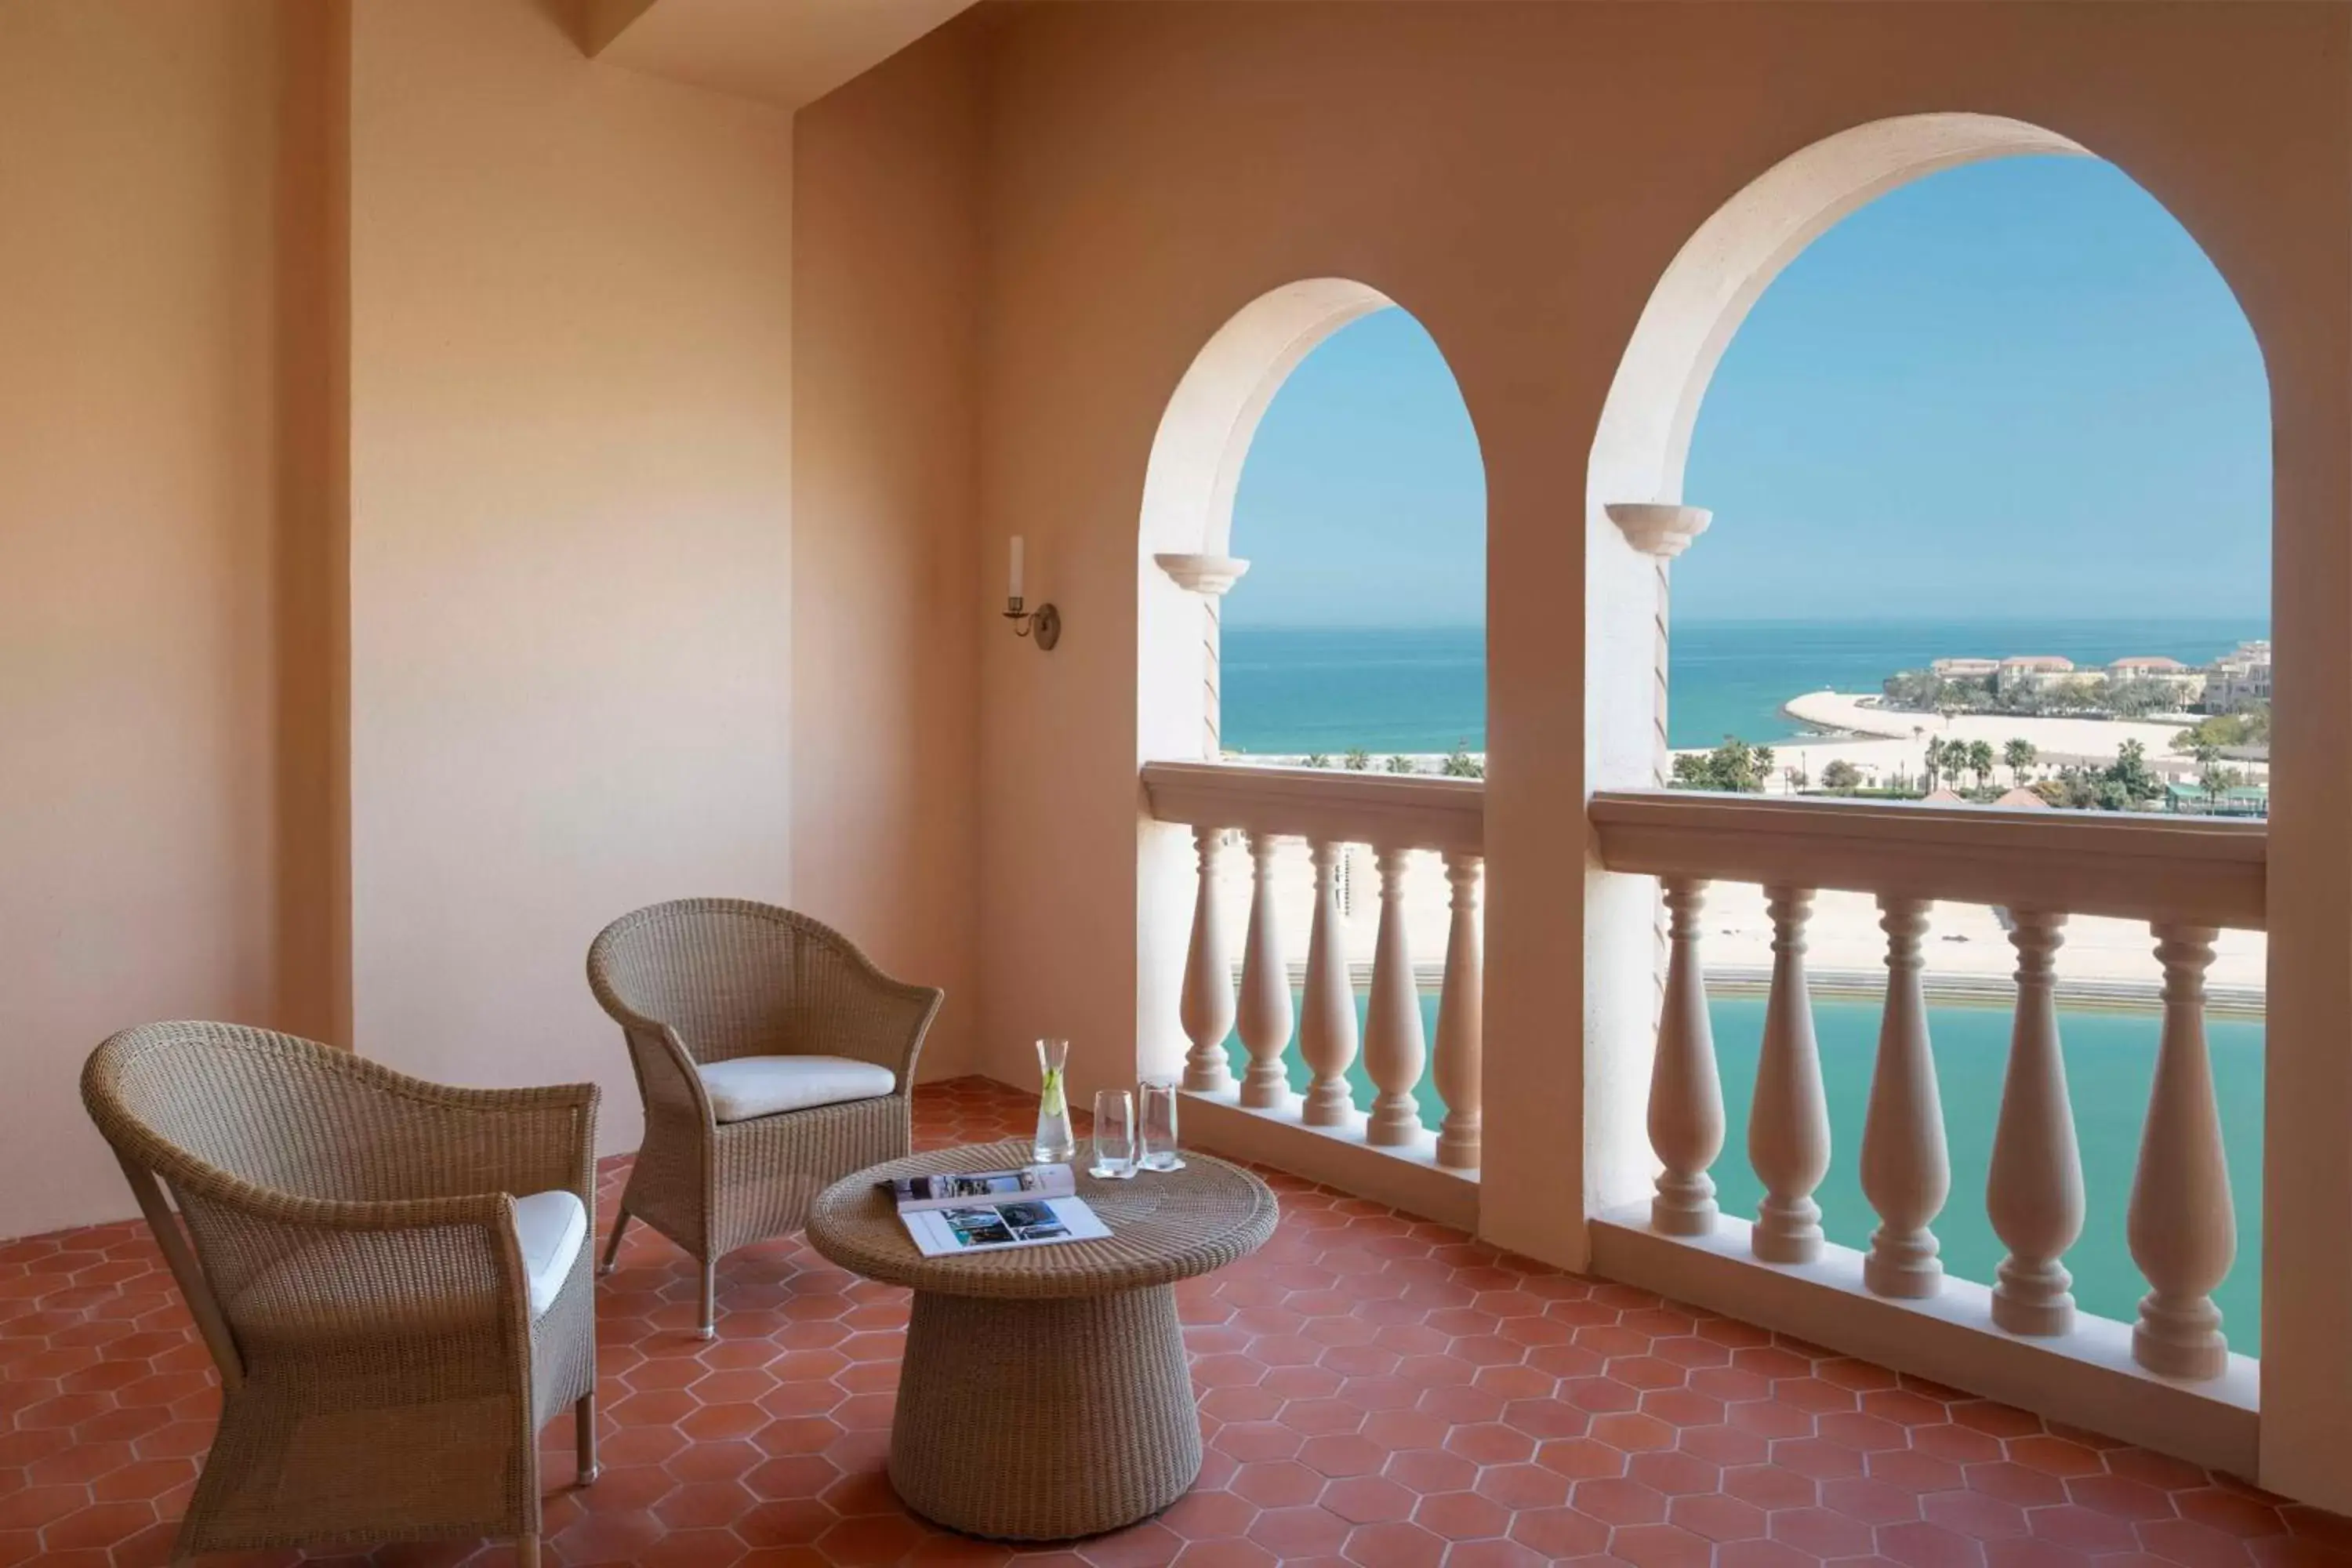 View (from property/room) in Marsa Malaz Kempinski, The Pearl